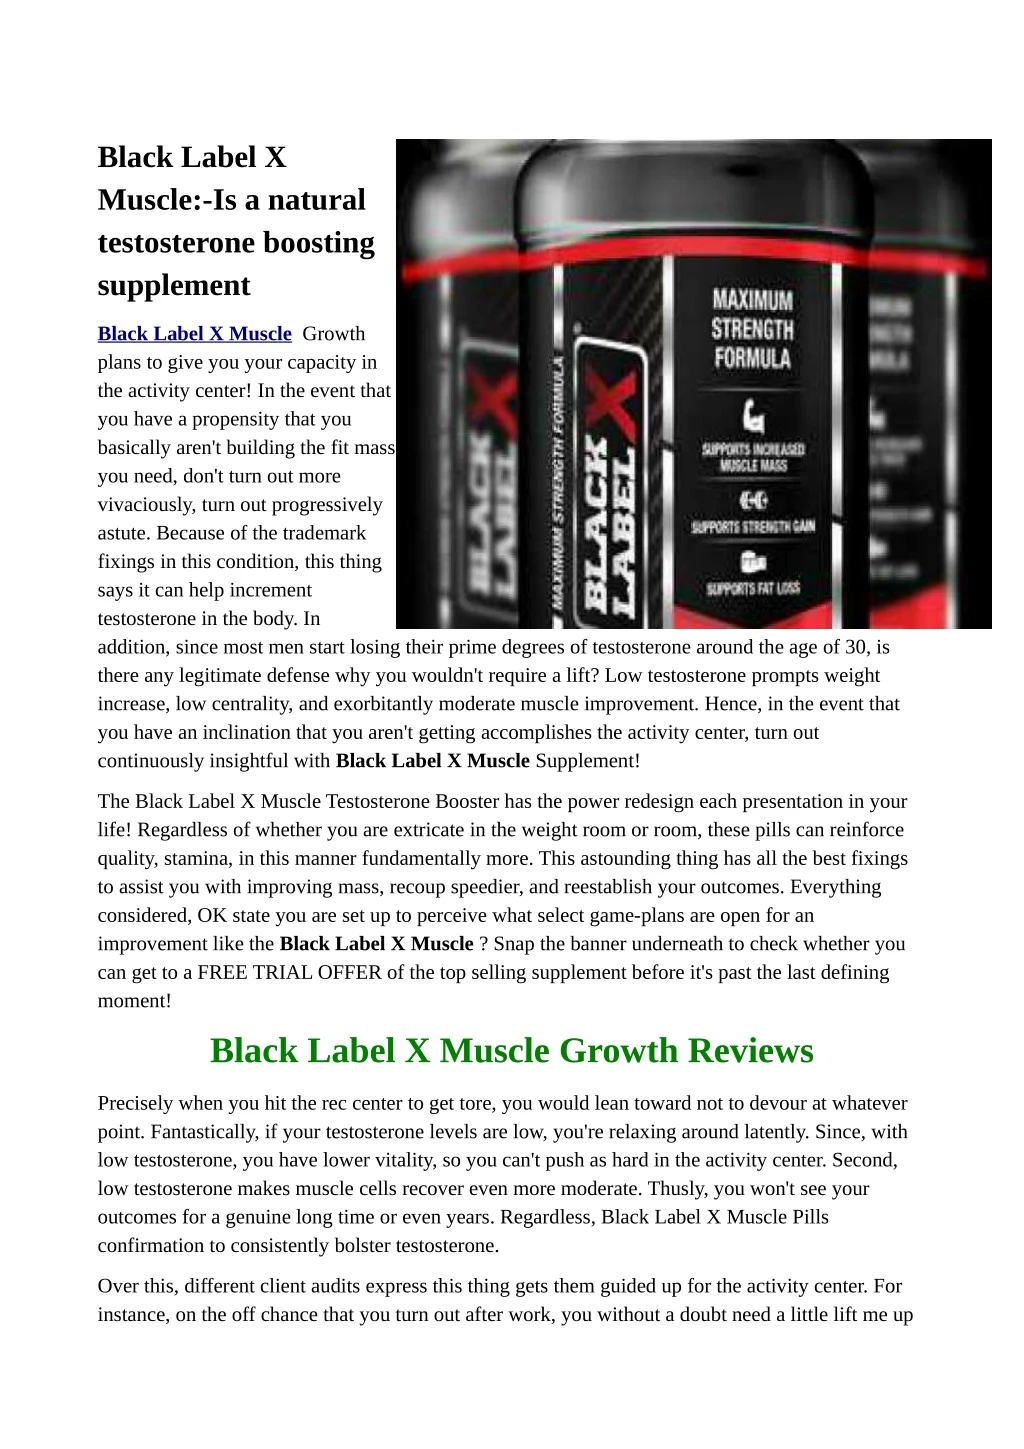 black label x muscle is a natural testosterone